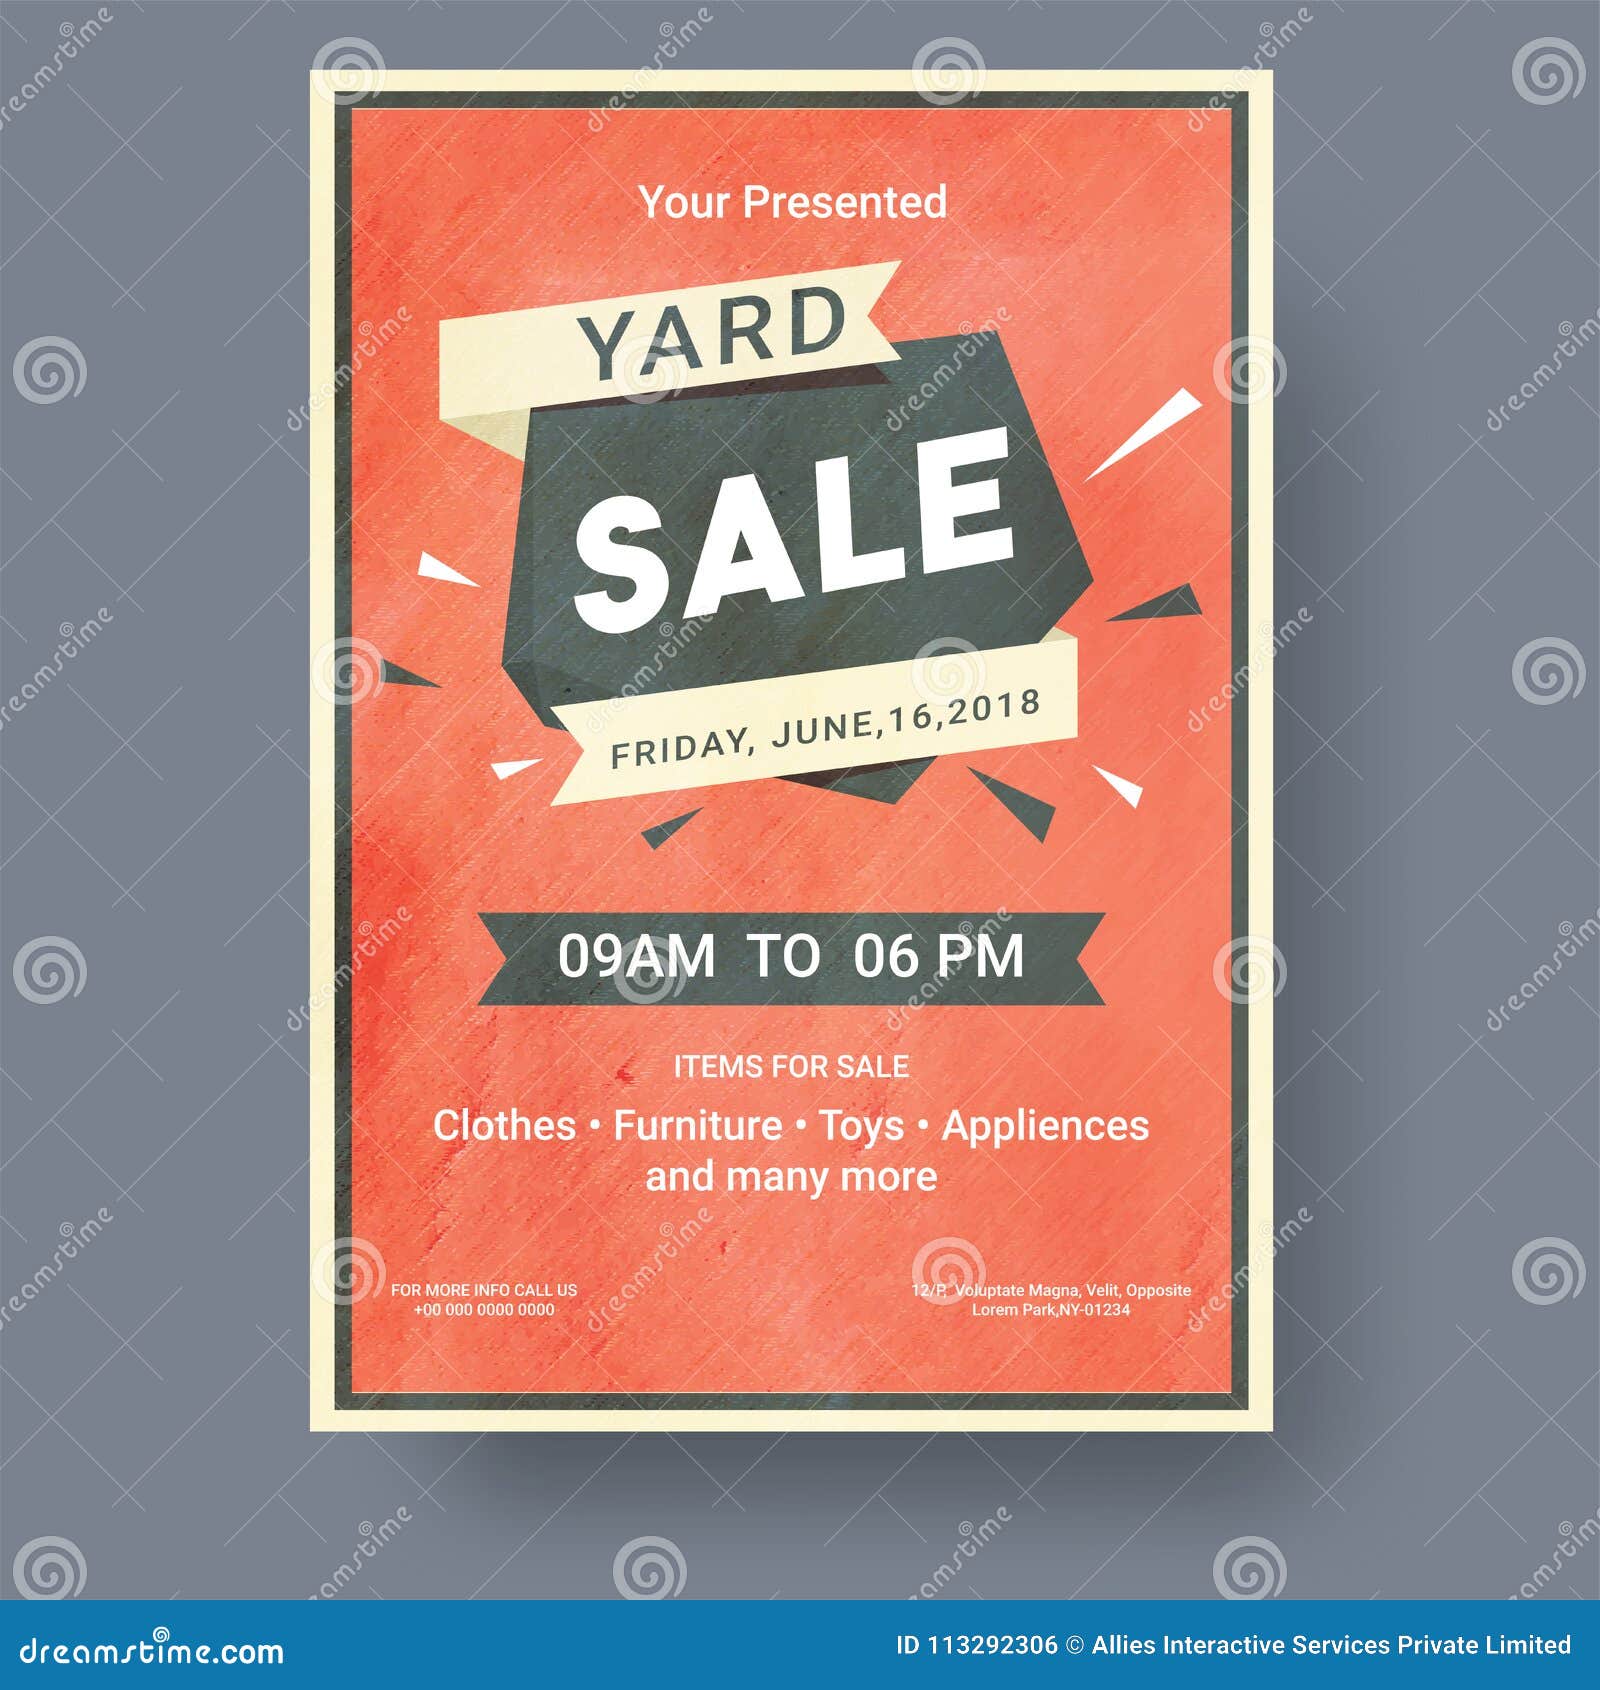 Garage Sale Template Free from thumbs.dreamstime.com